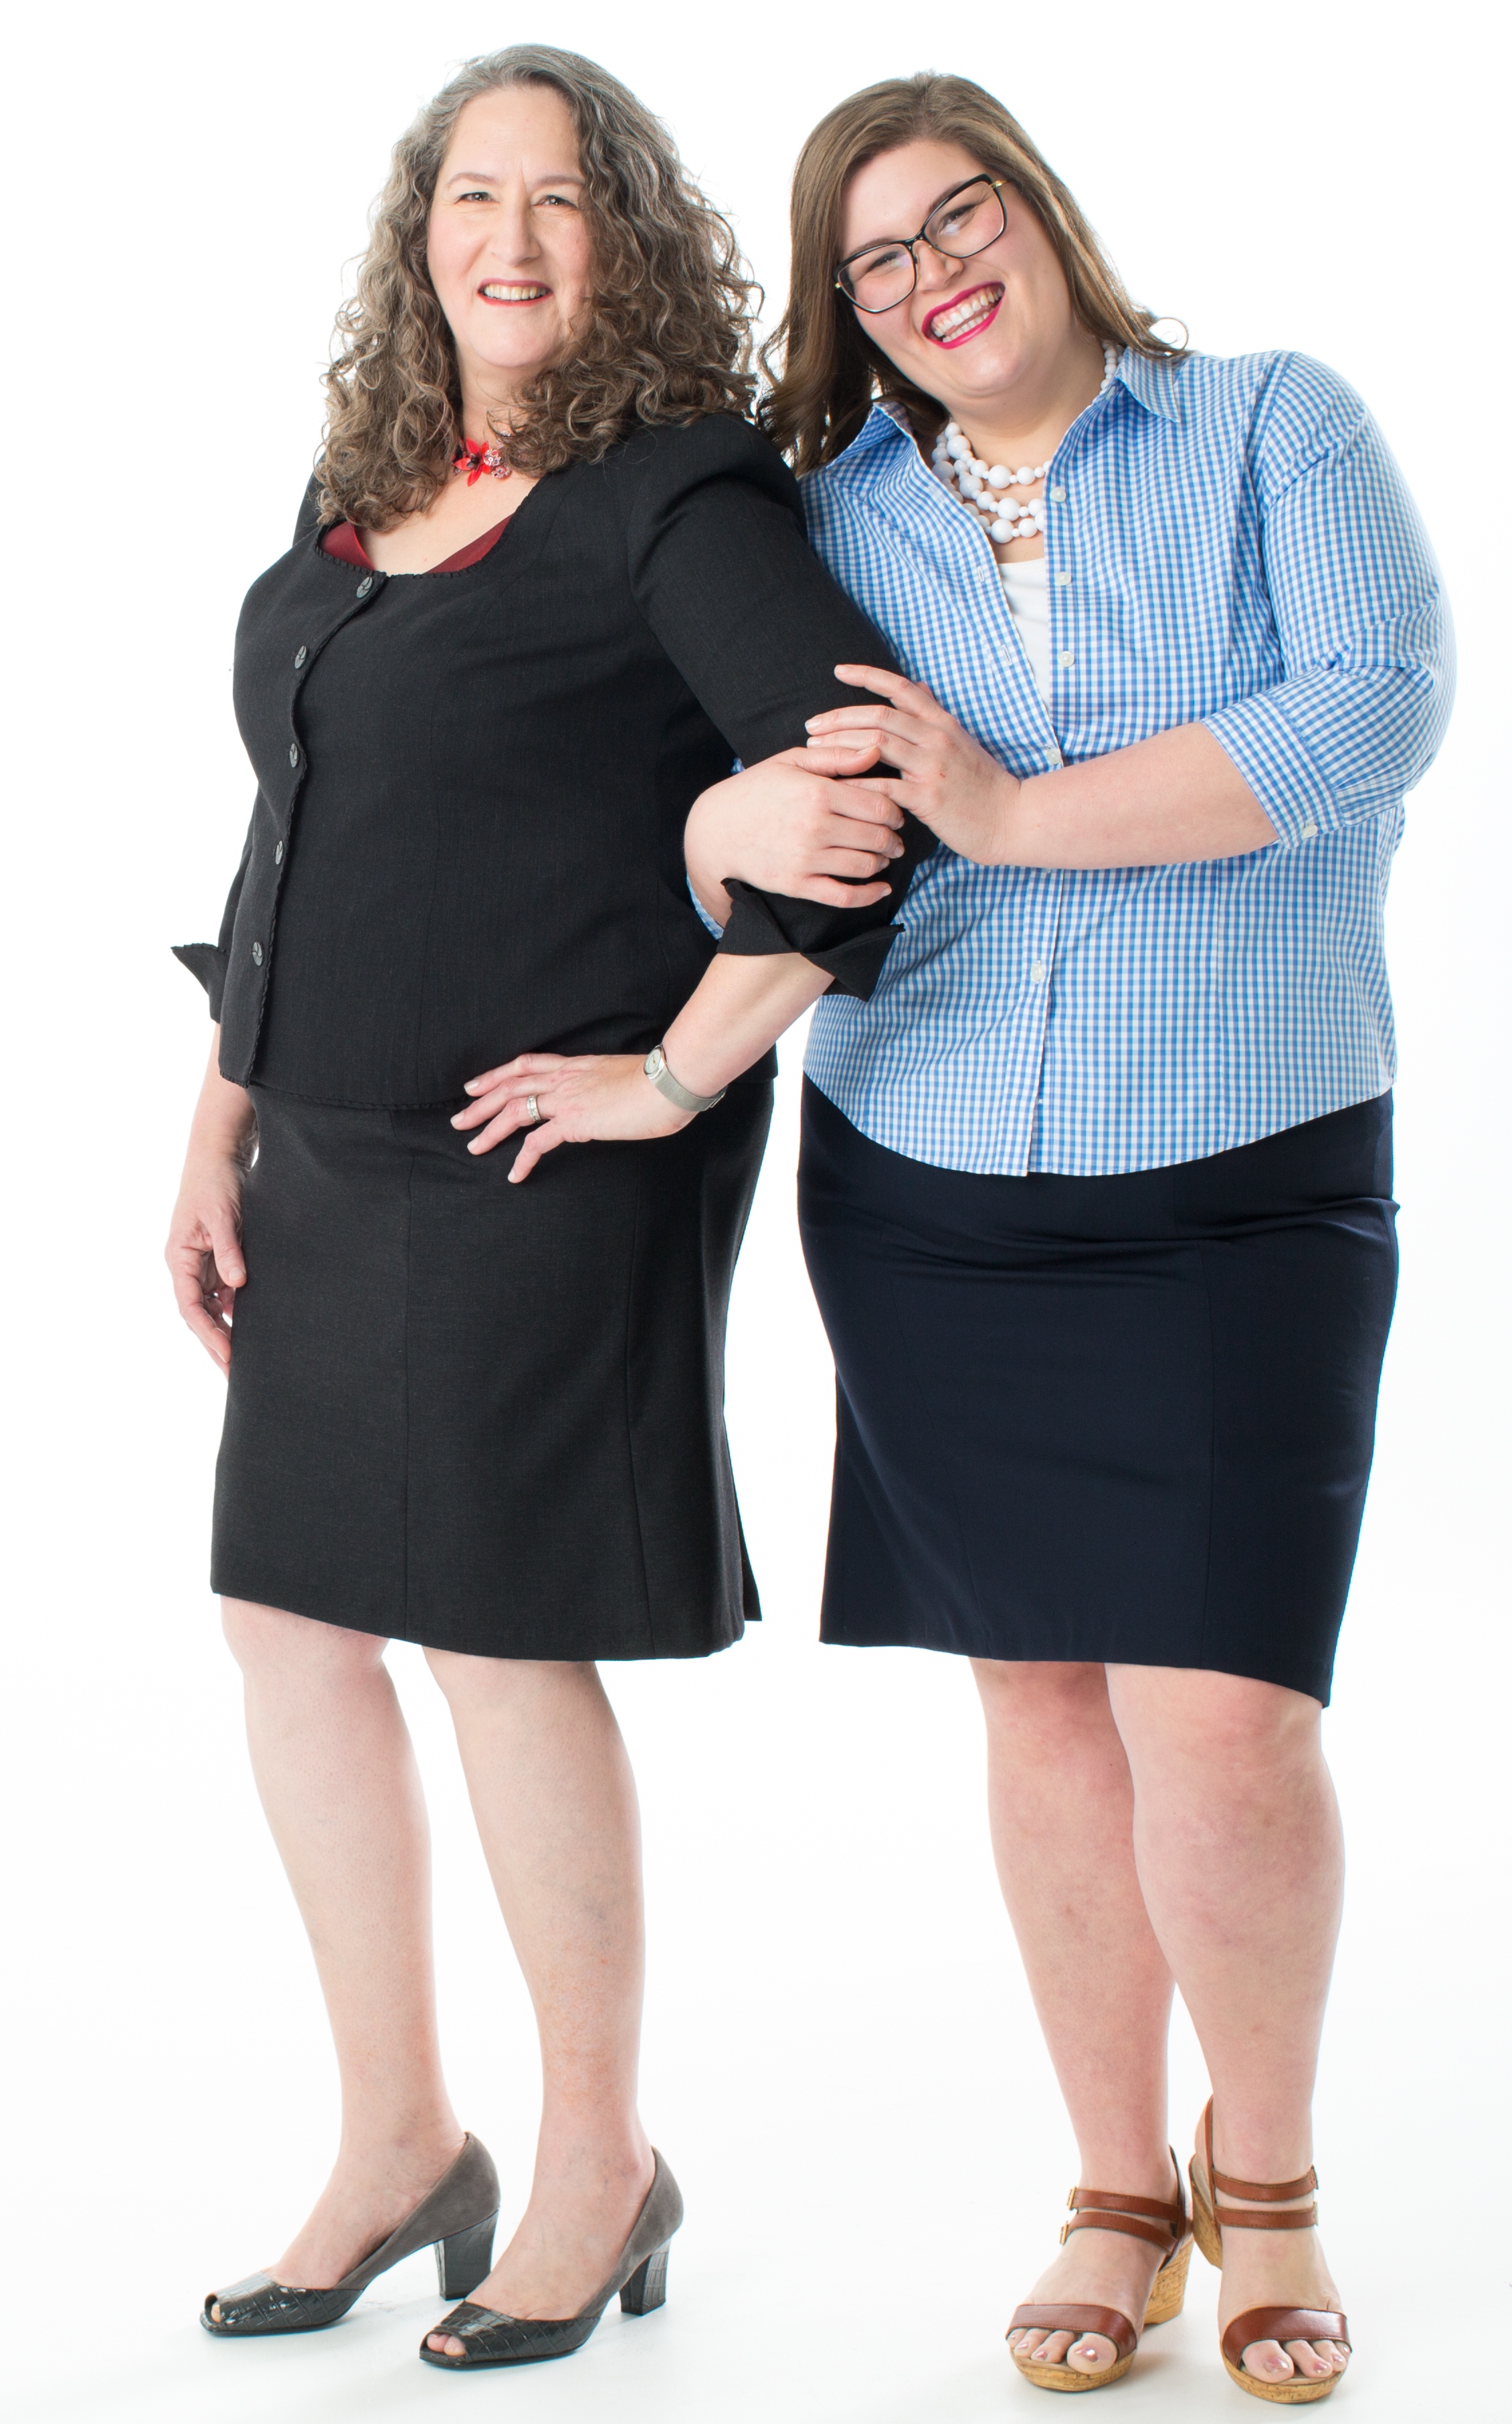 New for Spring: USA-Made Business Attire for Curvy Professional Women